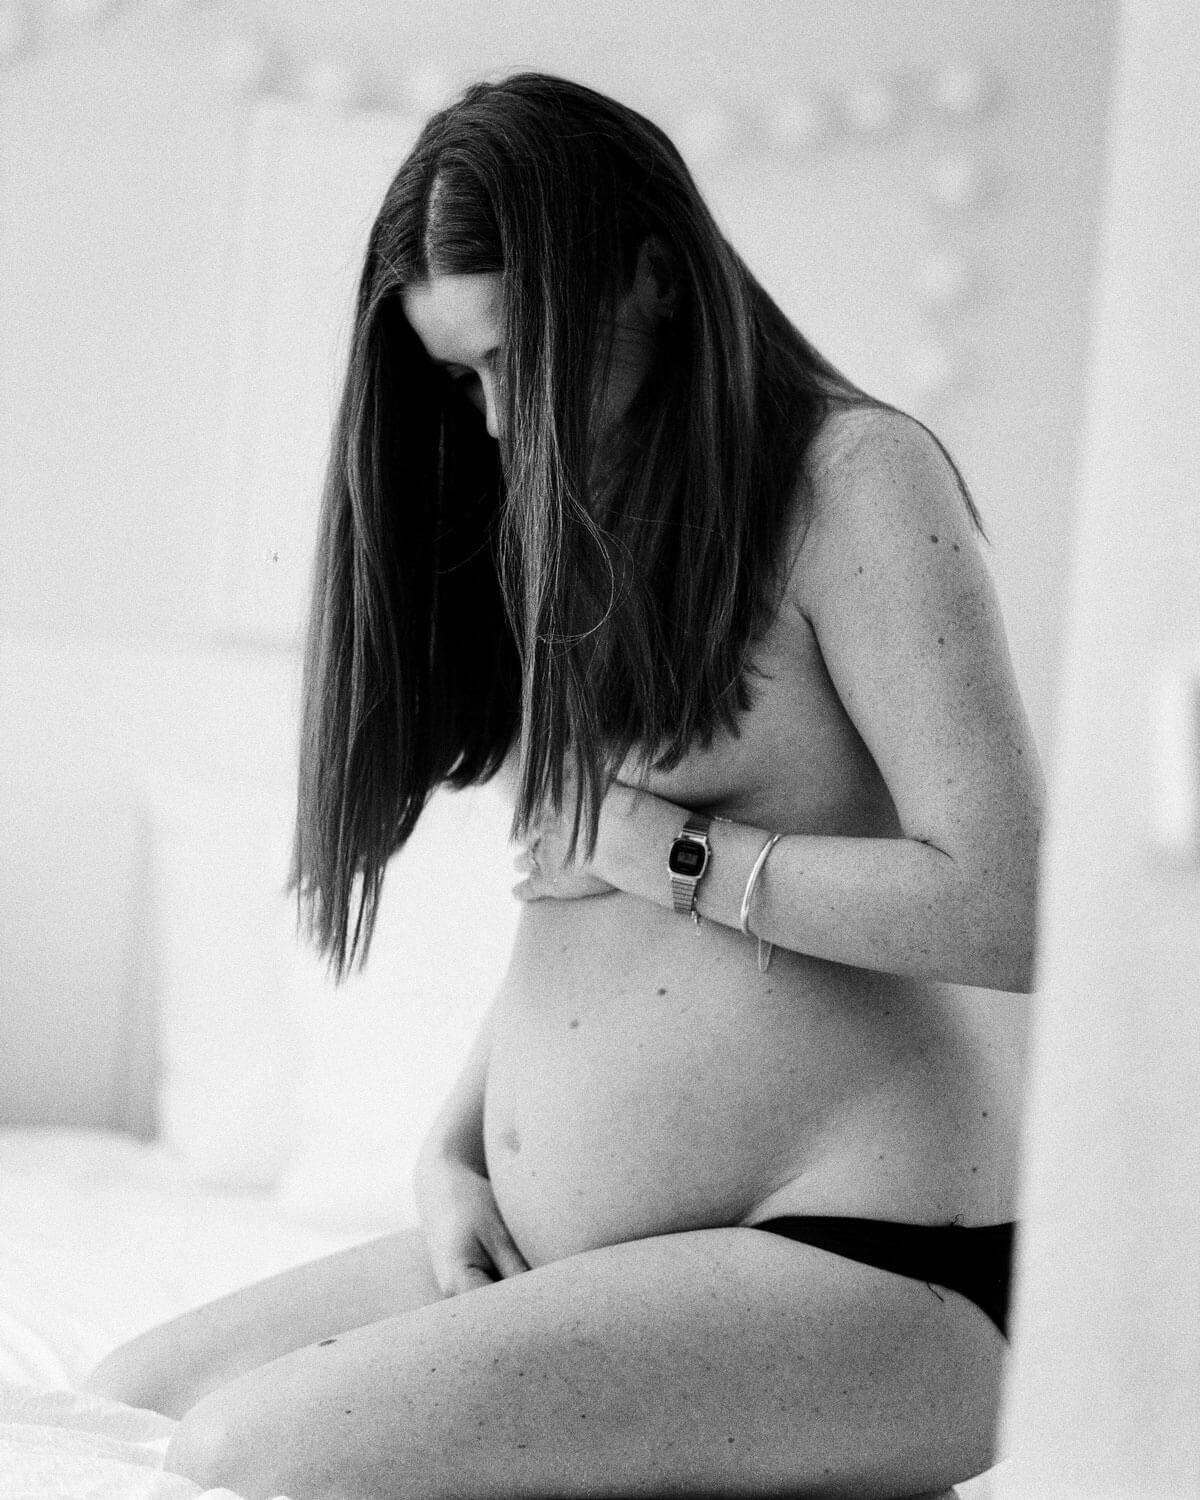 https://www.cakematernity.com/wp-content/uploads/pregnant-woman-behind-curtain.jpg